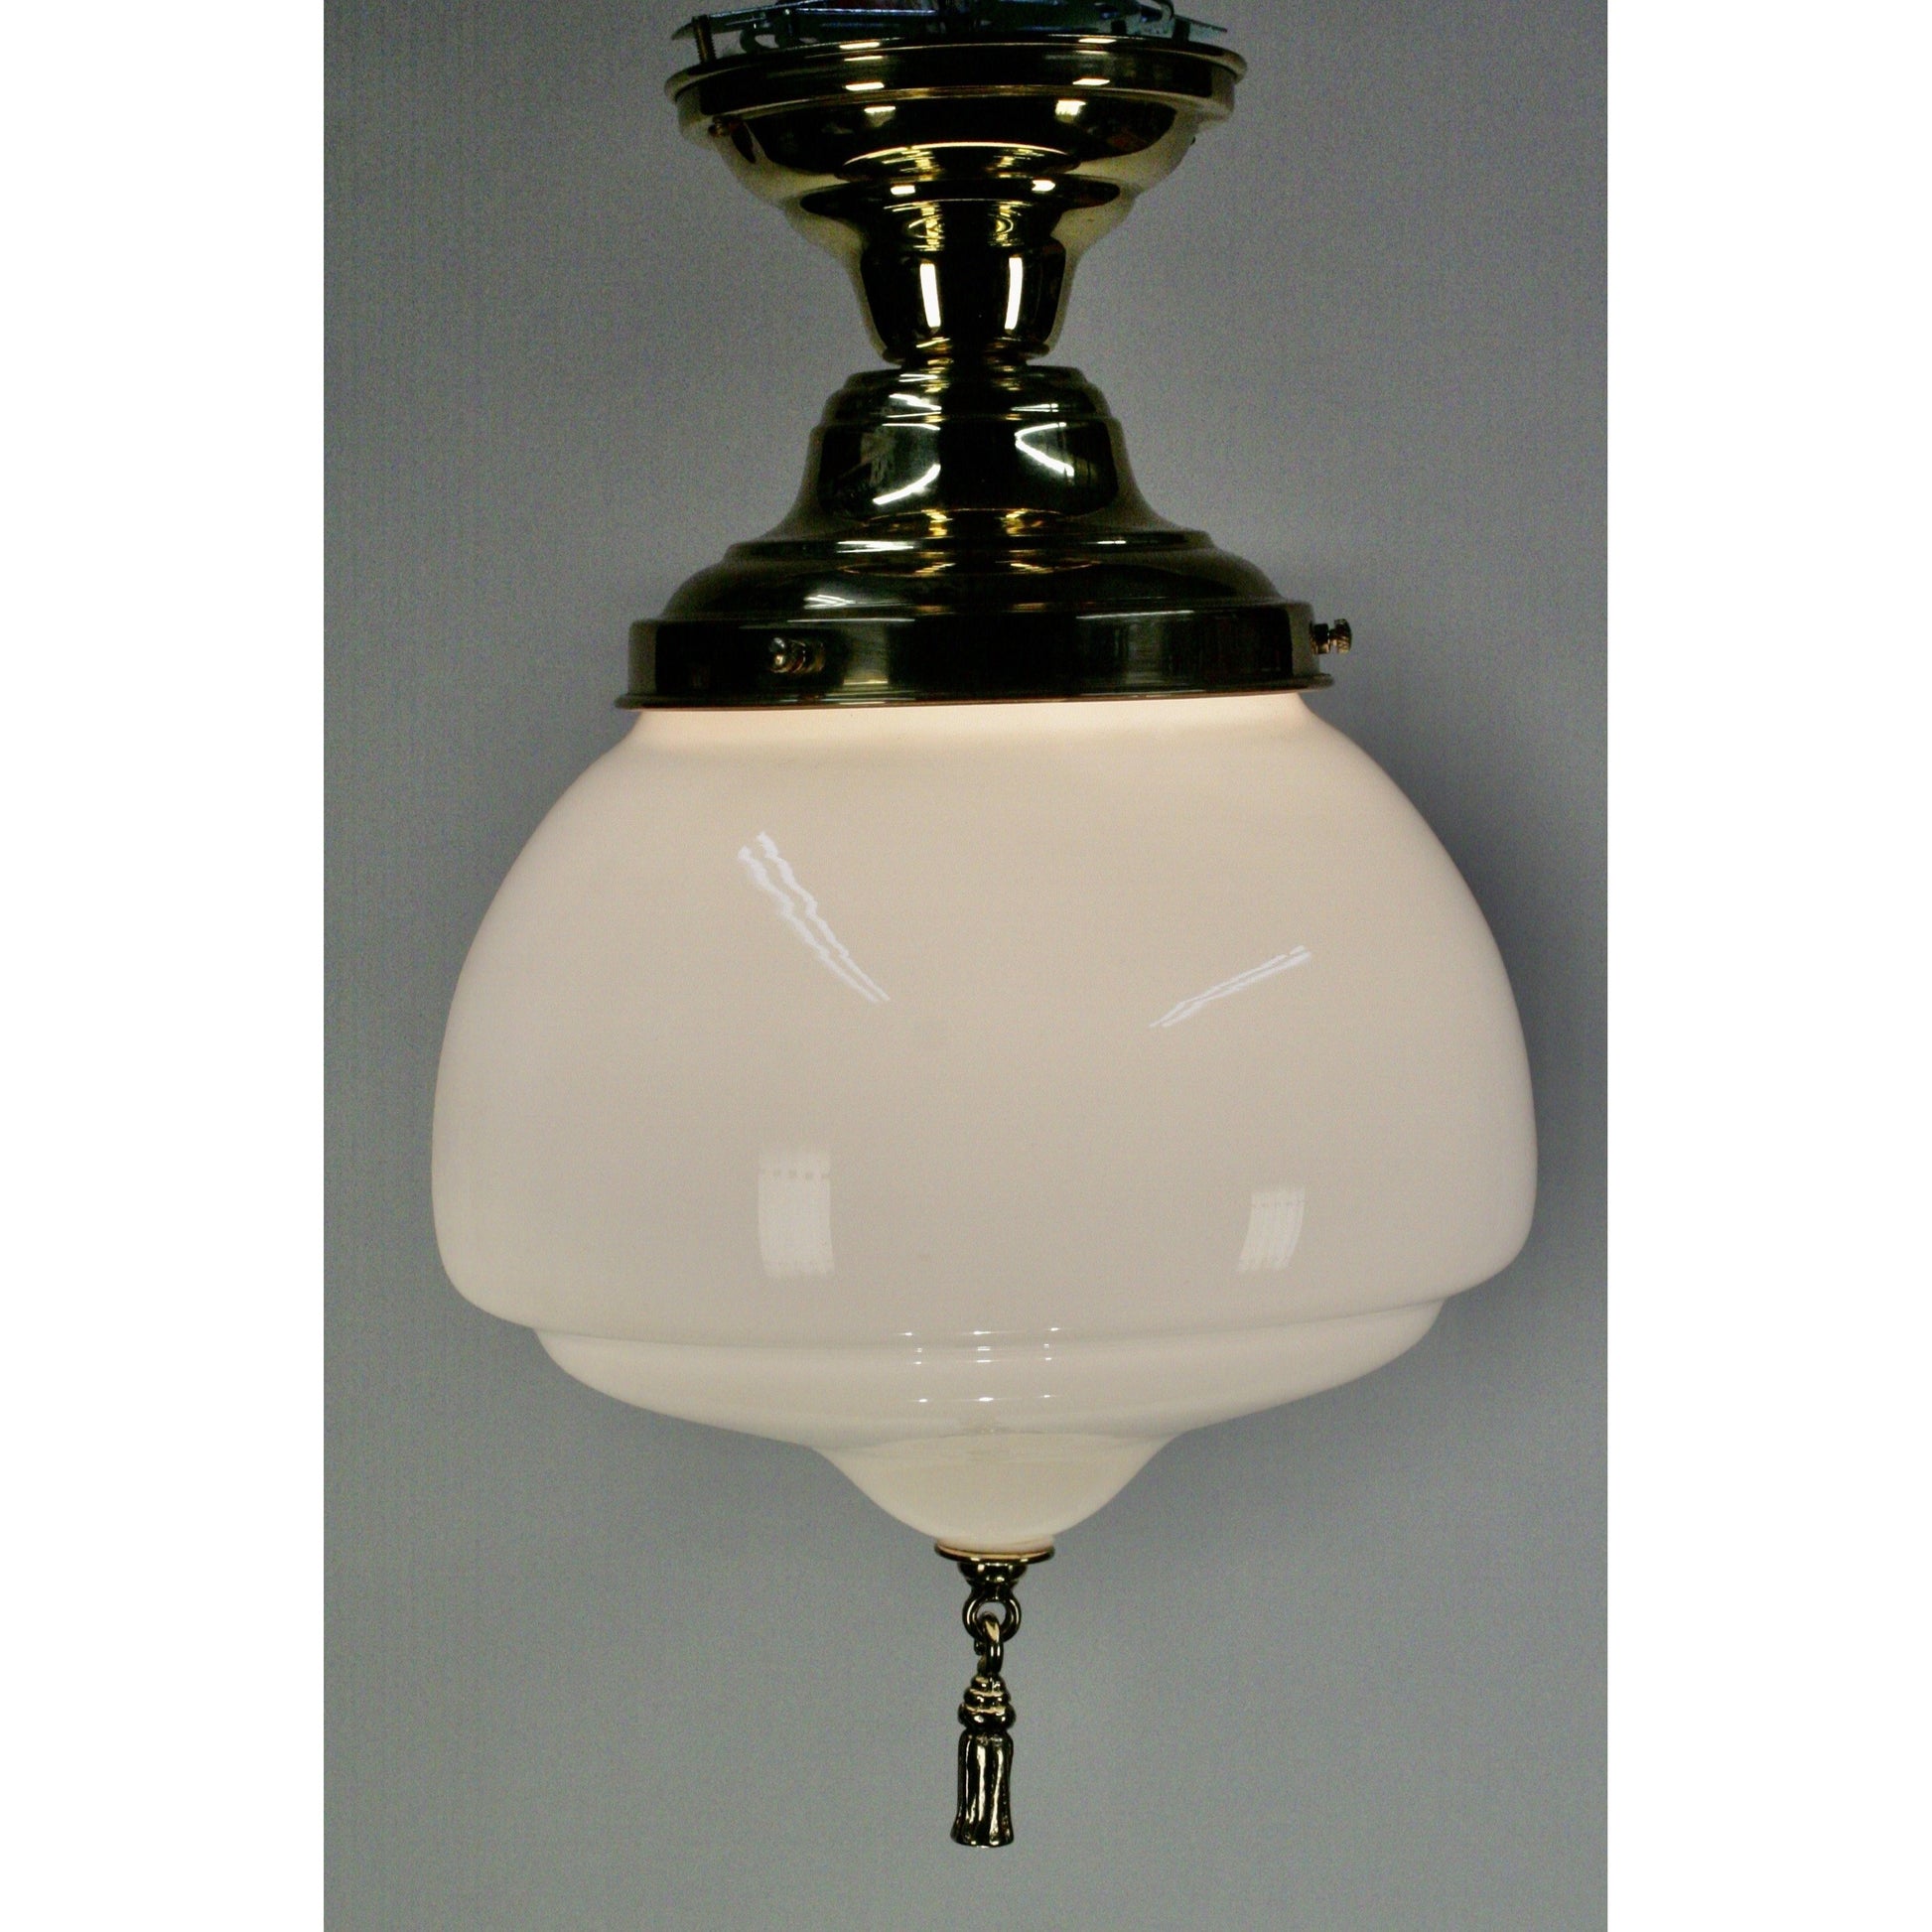 milk glass light with polished brass fixture